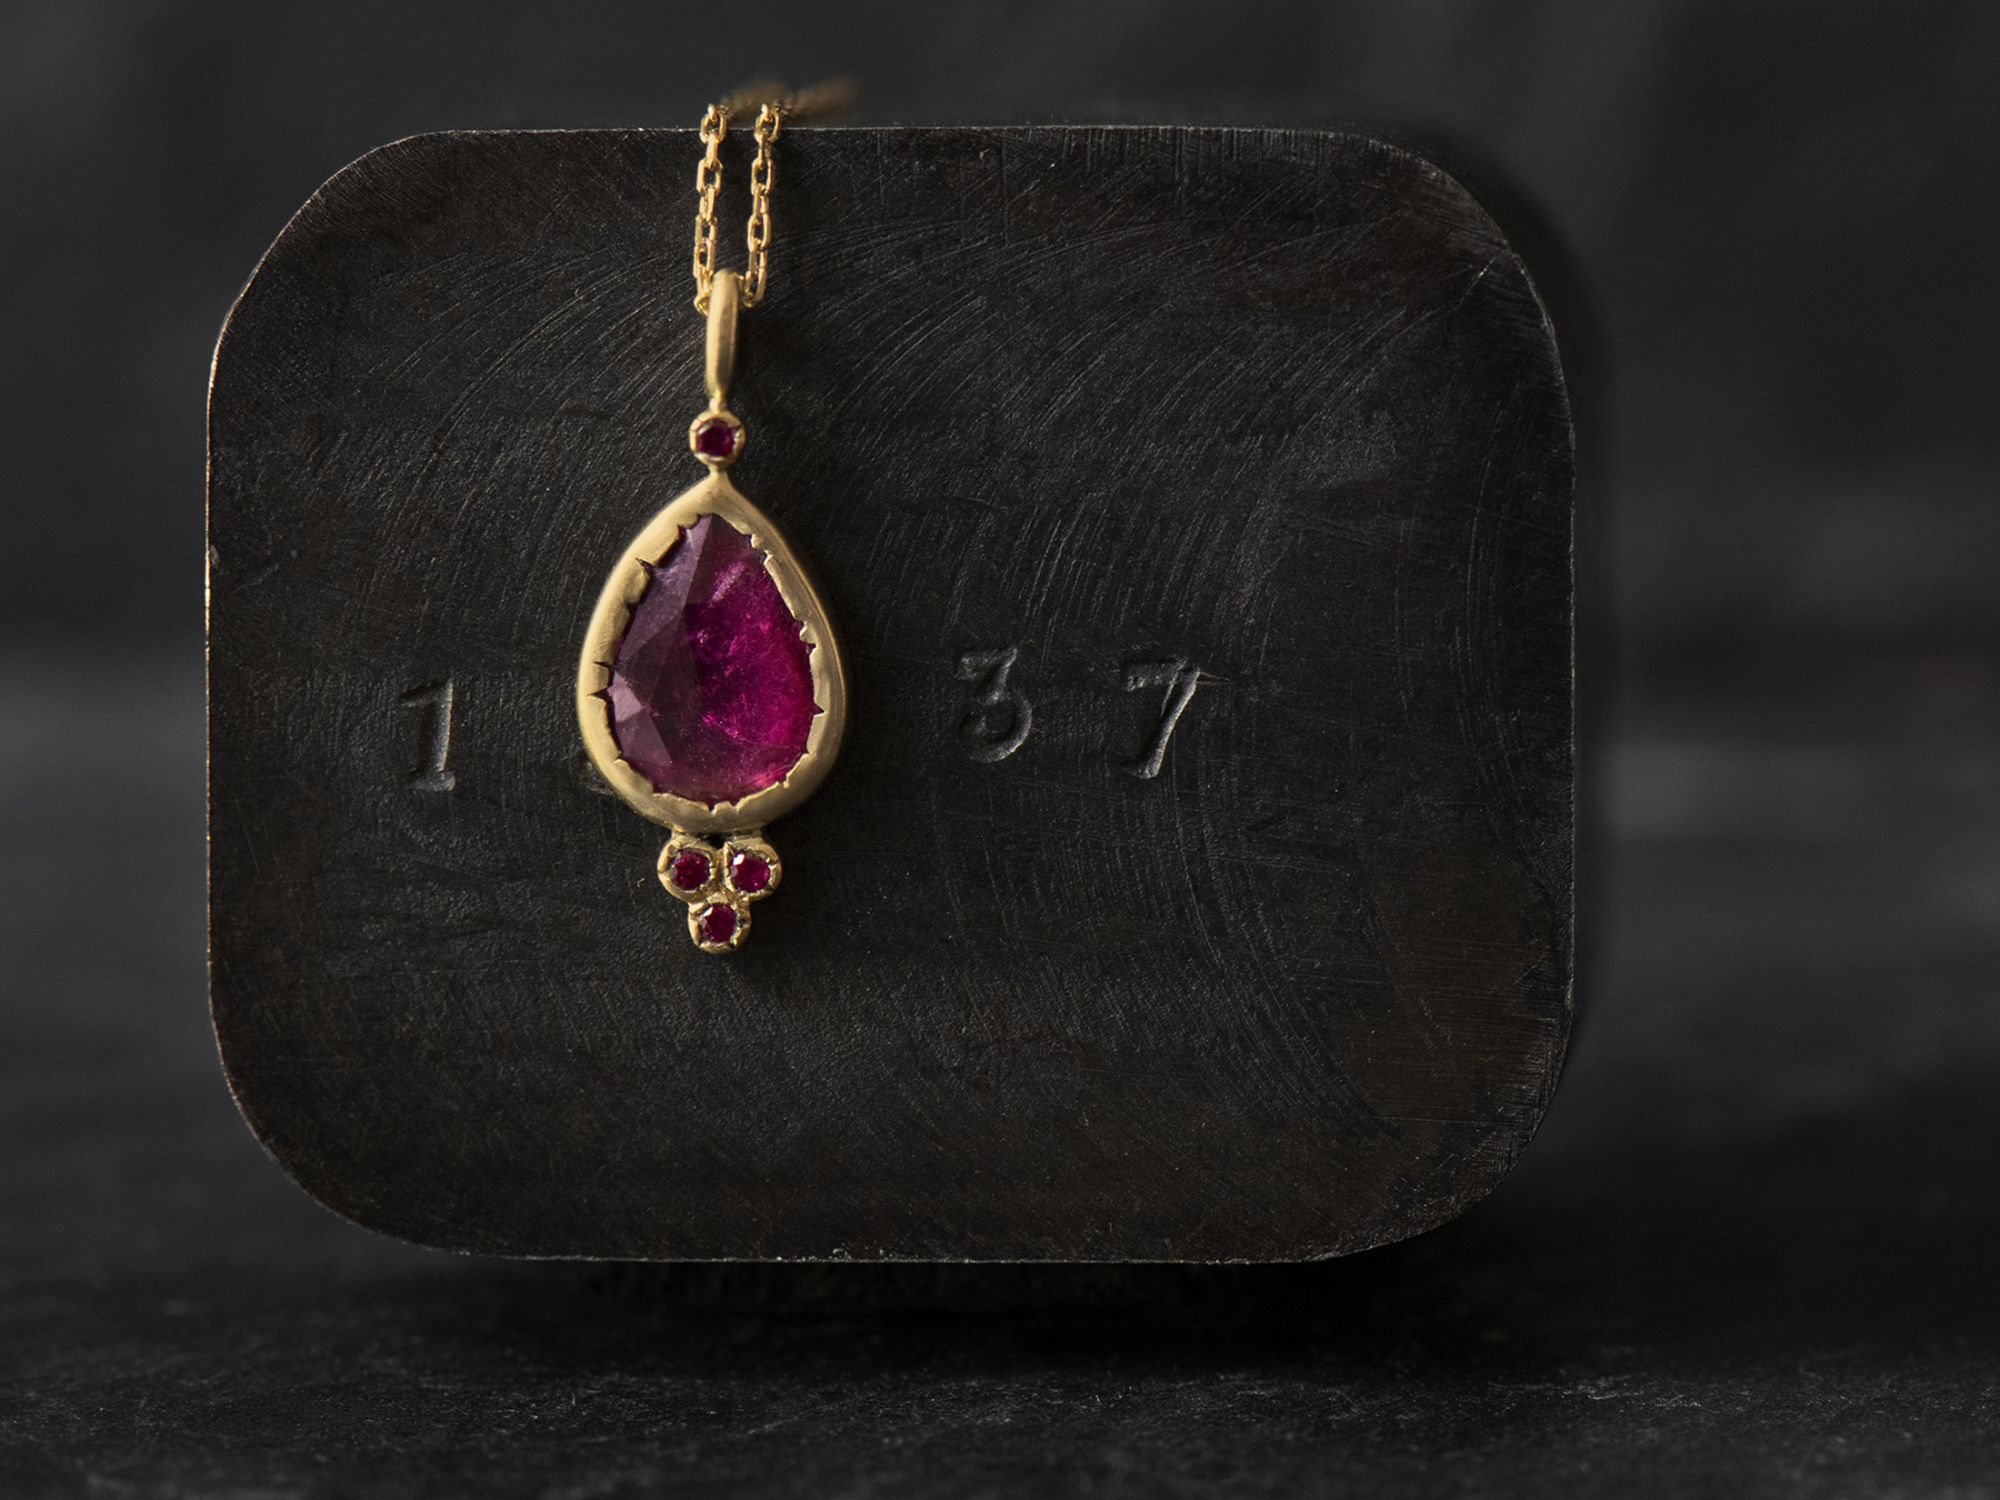 Samarcande yellow gold and pink tourmaline necklace by Emmanuelle Zysman